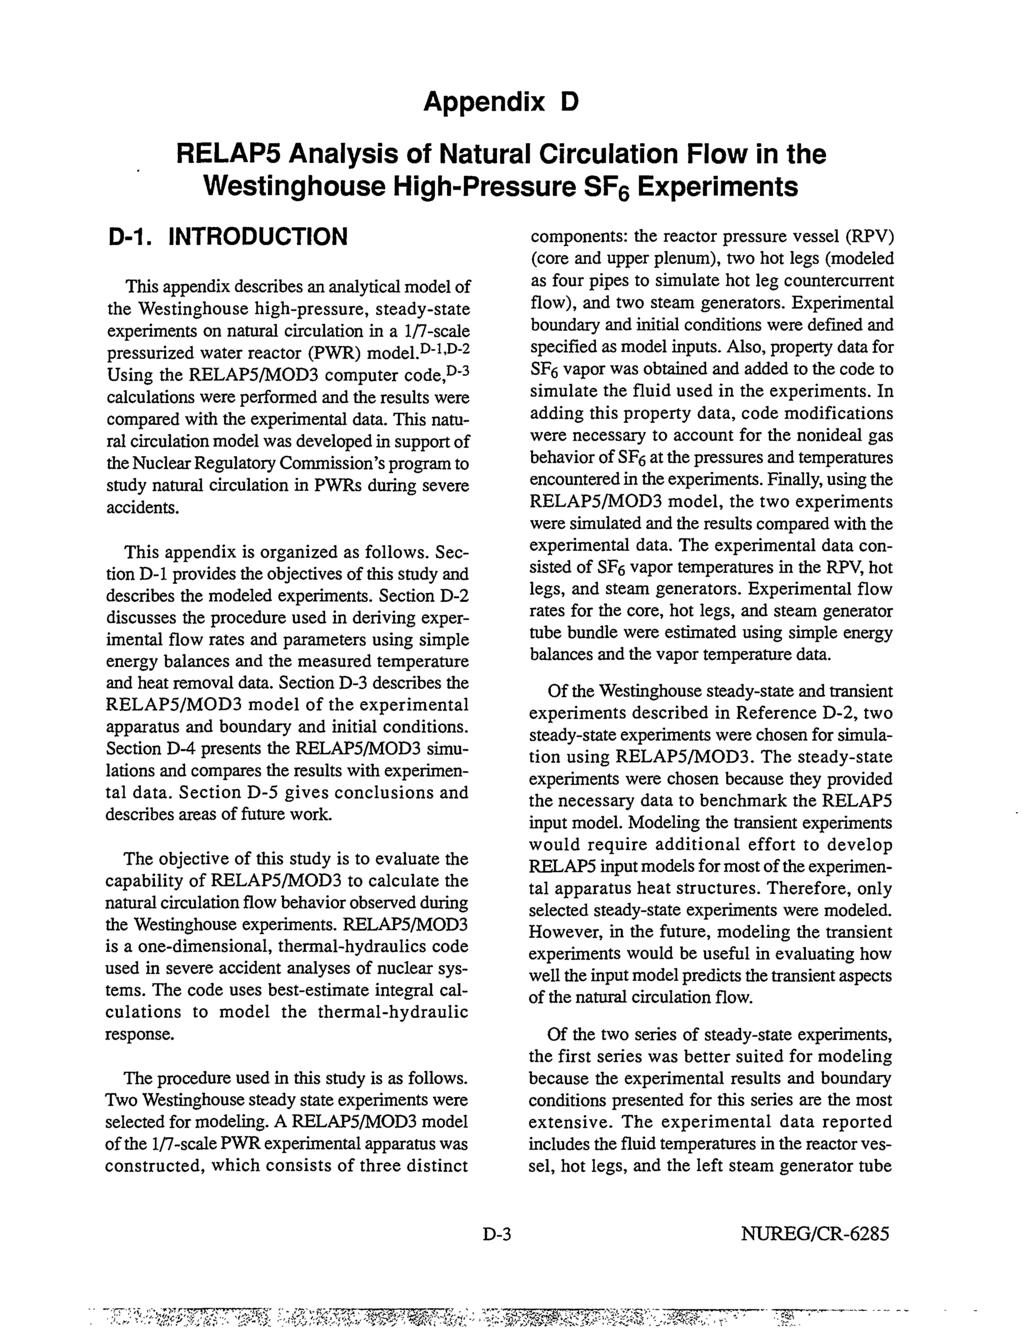 Appendix D RELAP5 Analysis of Natural Circulation Flow in the Westinghouse High-Pressure SF 6 Experiments D-1.